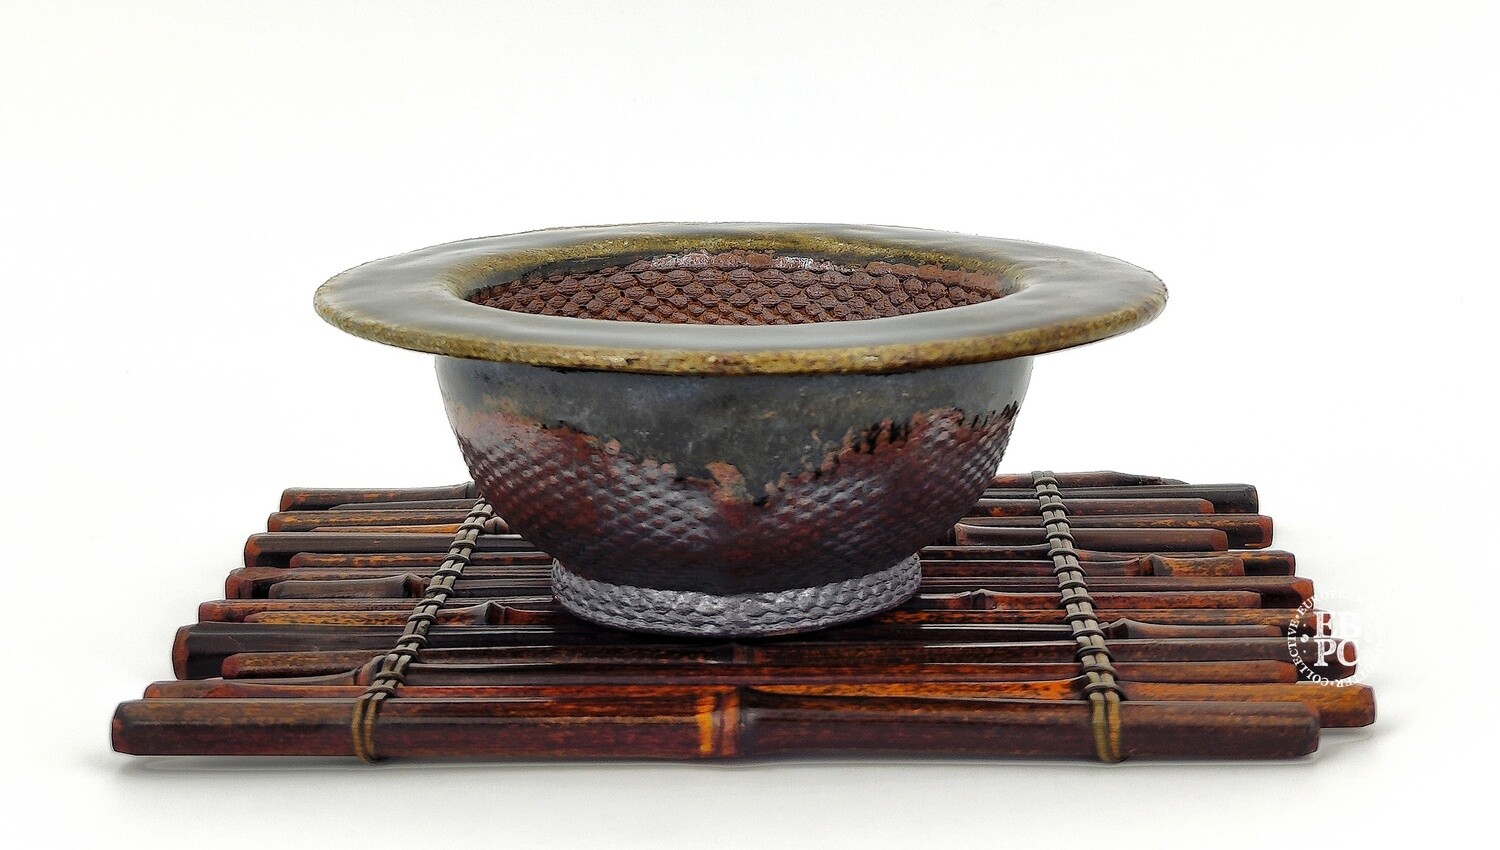 Igor Carino - Italy. 14.5cm; Rustic Round; Glazed; Innovative 3D Printed Techniques; Wood-Fired; Culmination of 10 Years Research; Gafu-ten Winner; Natural Ash Deposit Glaze. *EBPC DIRECT